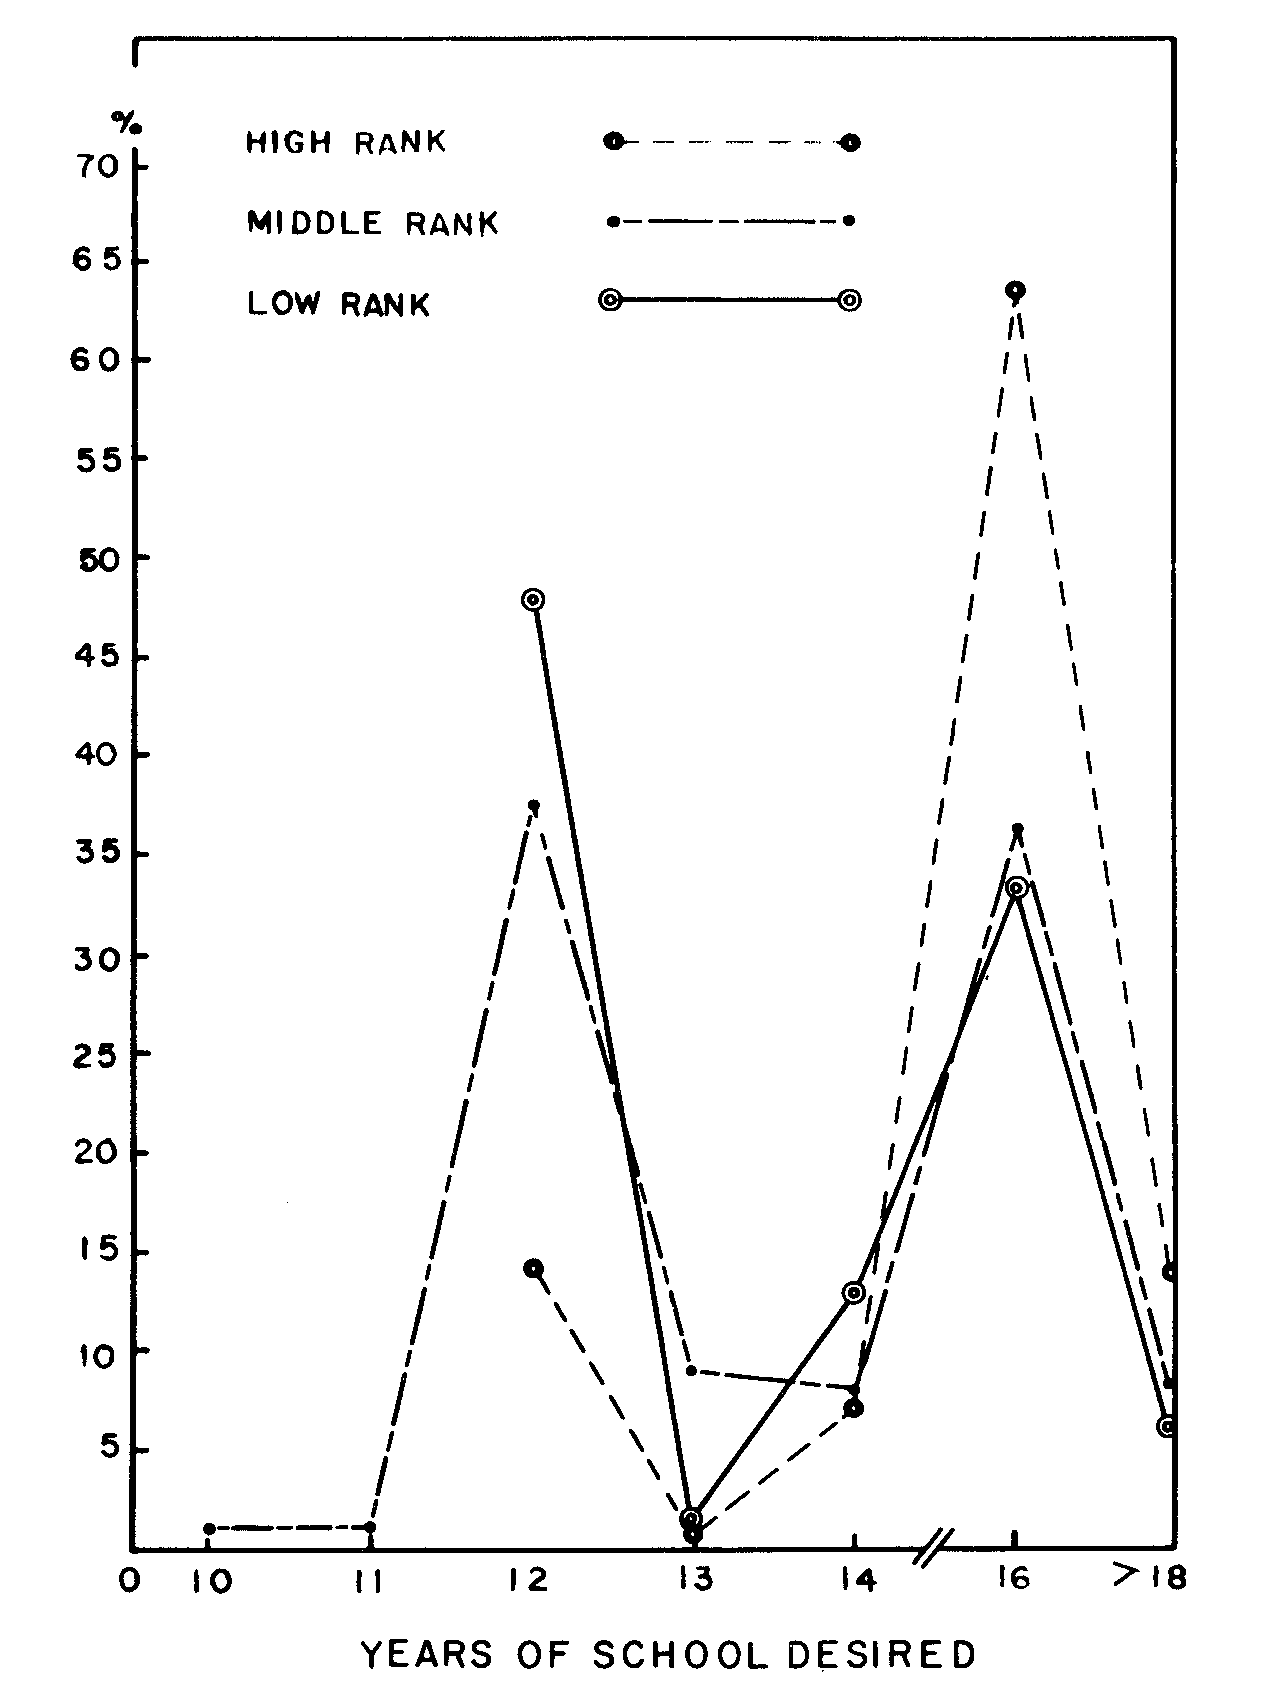 Figure 24. Personal goals for education in low, middle and high socioeconomic rank in city with median educational level